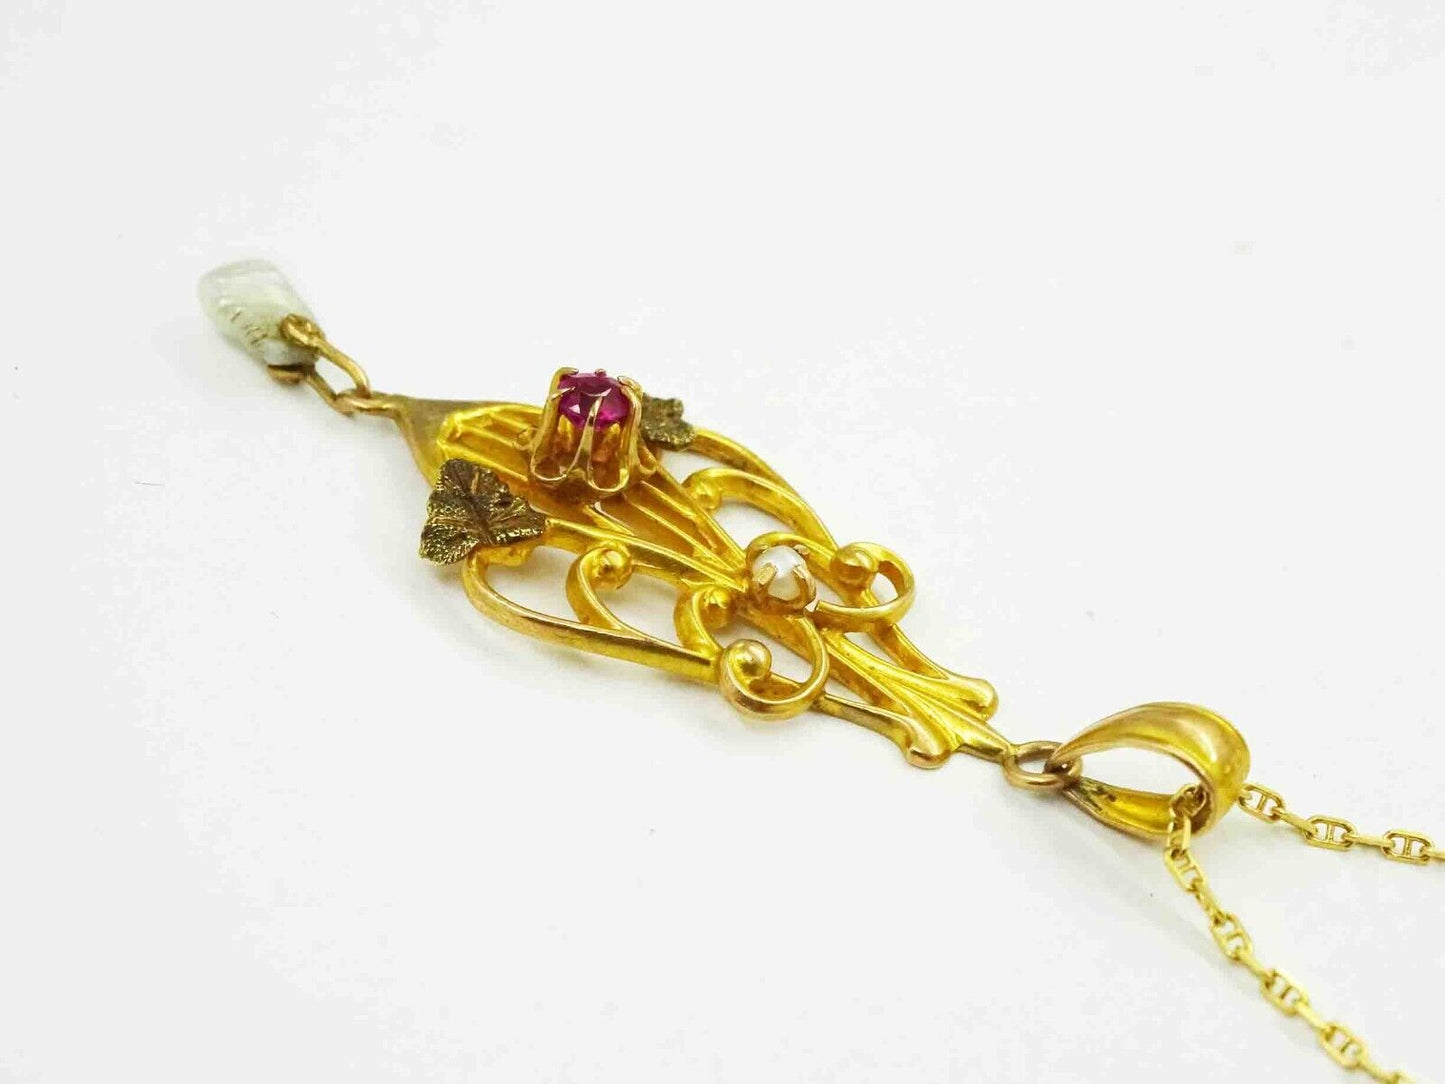 Vintage Pearl Drop Ruby Lavalier Pendant 10k Gold on Thin Chain 14k Gold 20"